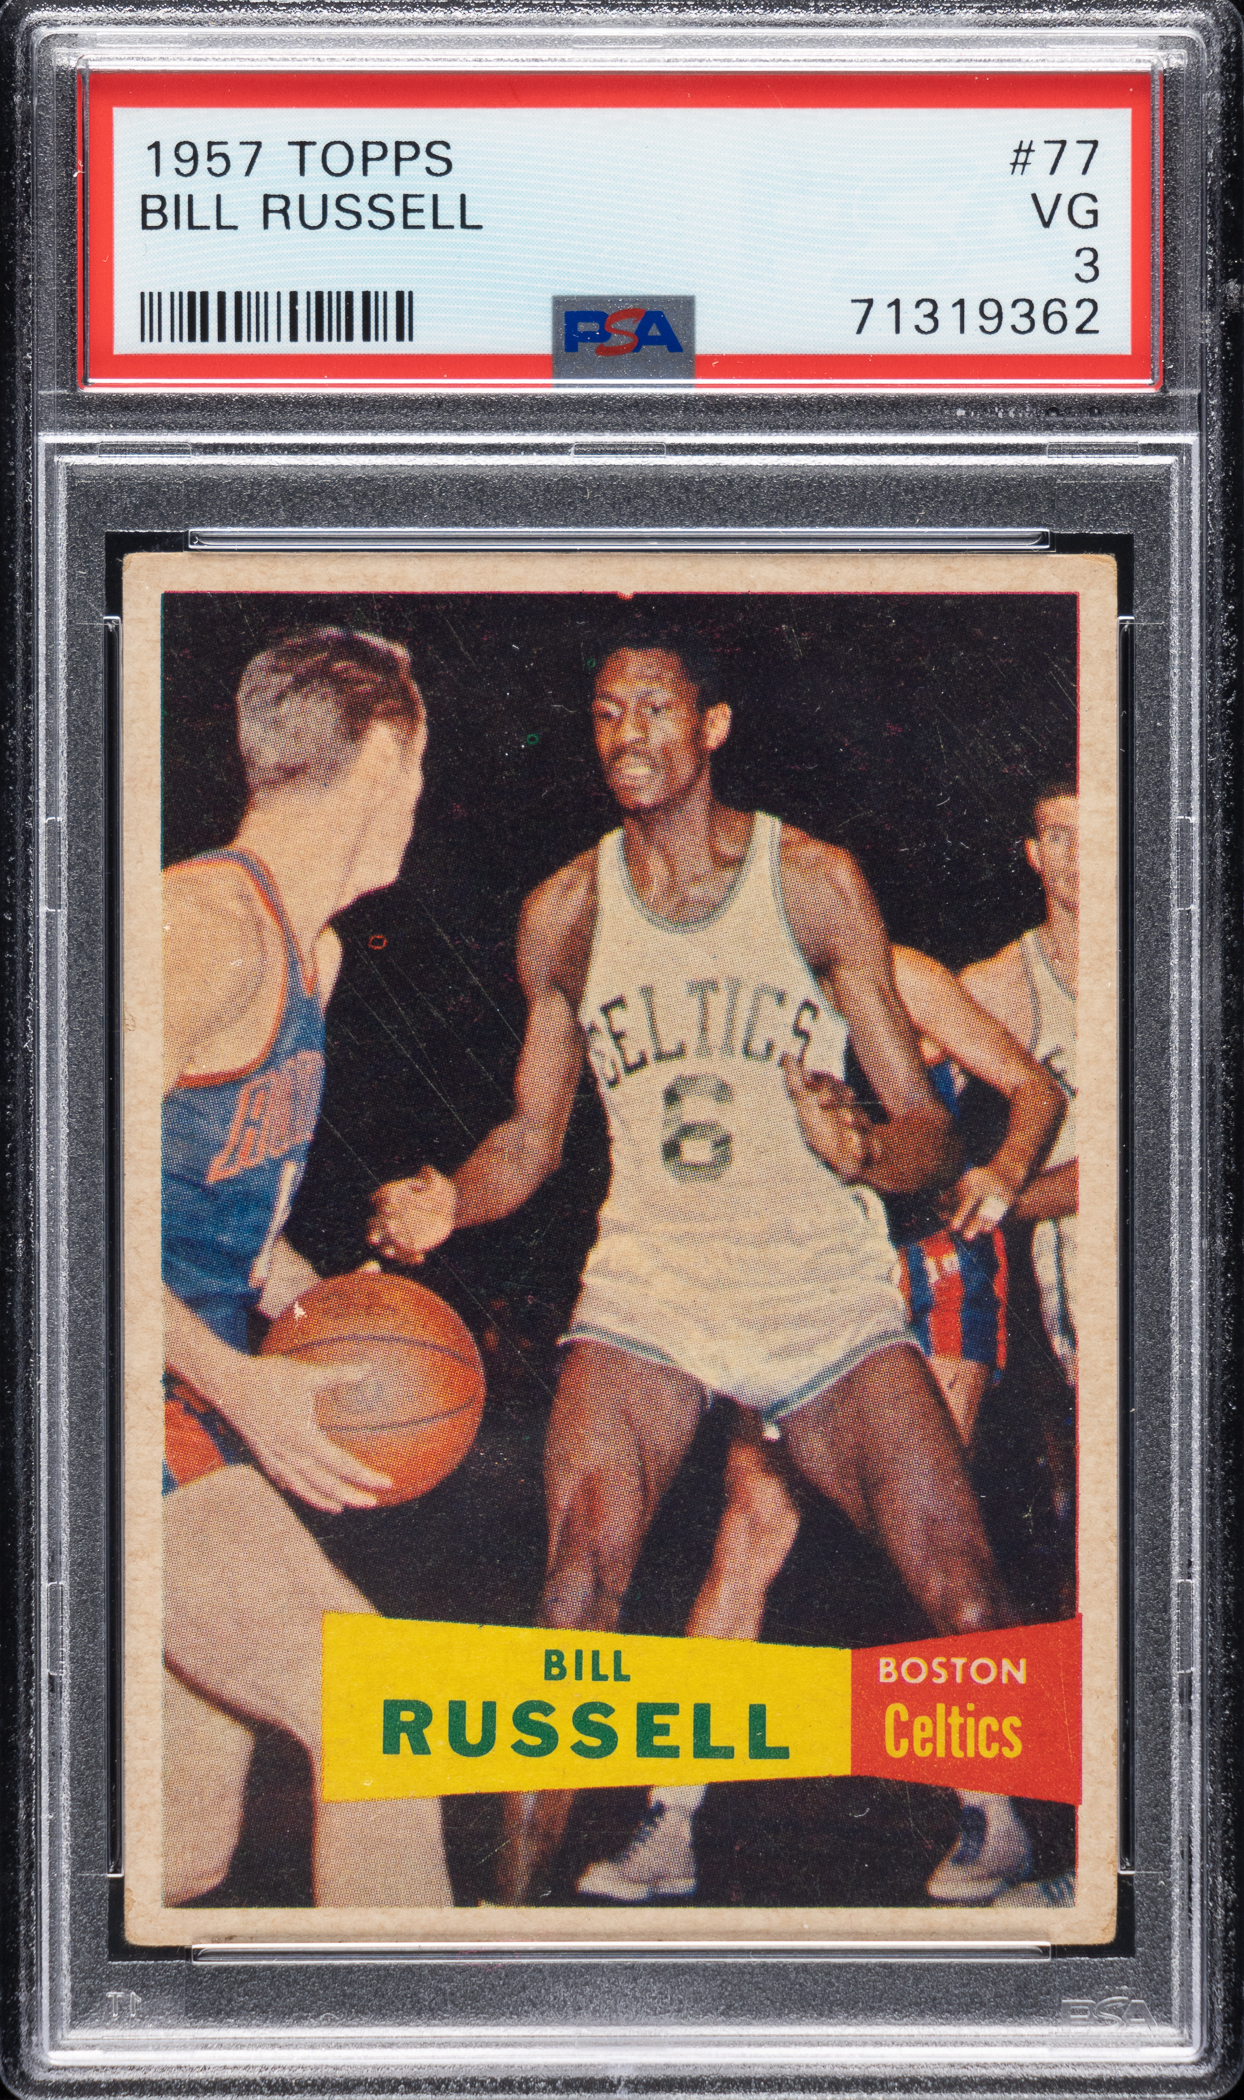 This collection also includes a 1957 Topps Bill Russell Rookie PSA VG 3